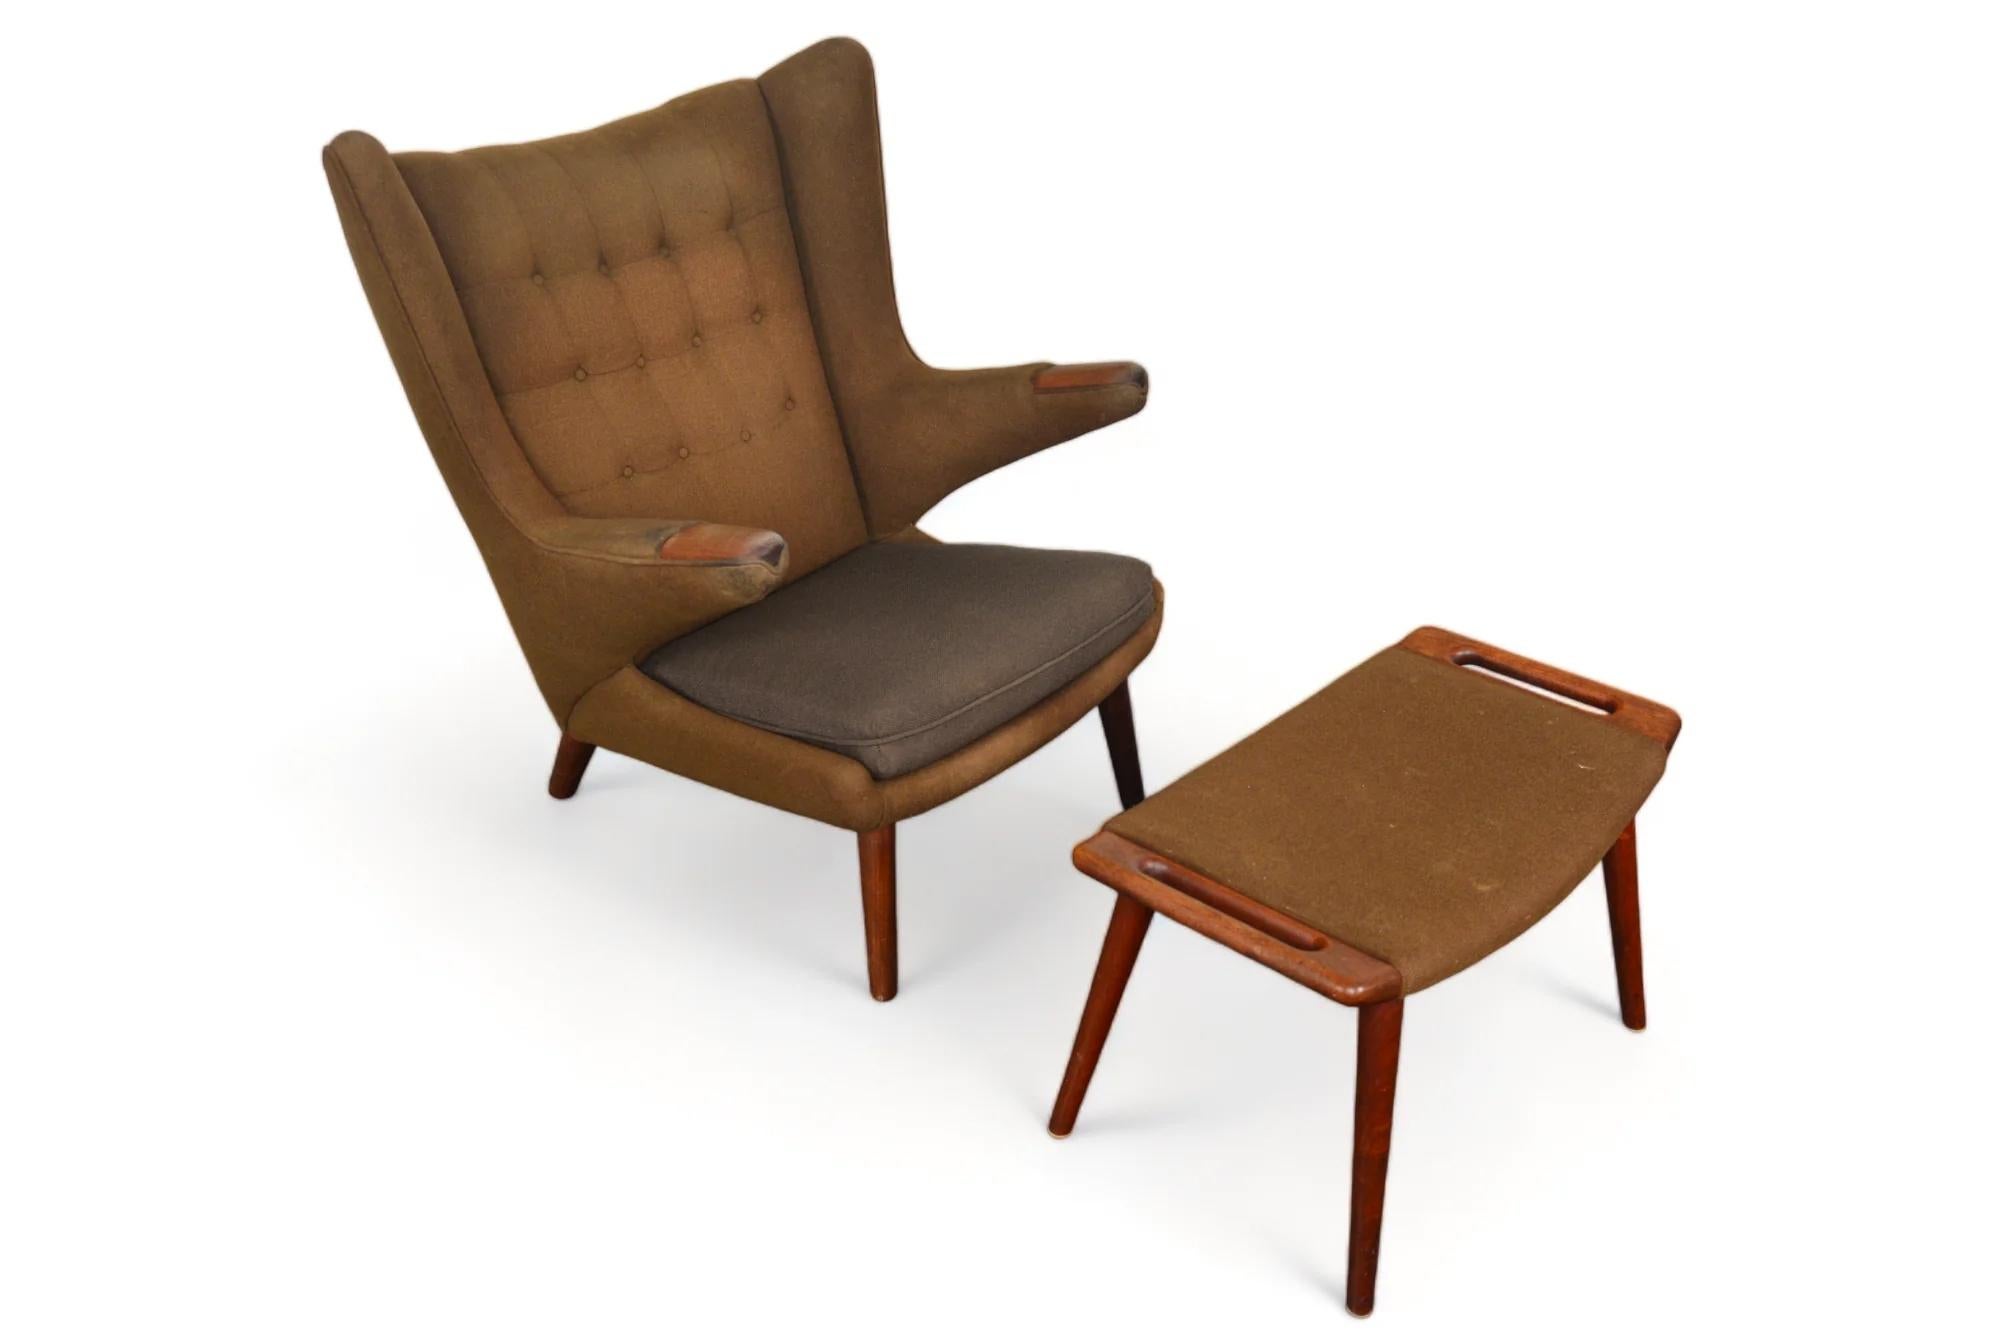 Designed in 1951 by Hans Wegner for AP Stolen, the Papa Bear chair has become an icon of danish design.  It is presented here in untouched condition alongside the matching ottoman (AP29), purchased by the original owner in the 1950s.  

Origin: